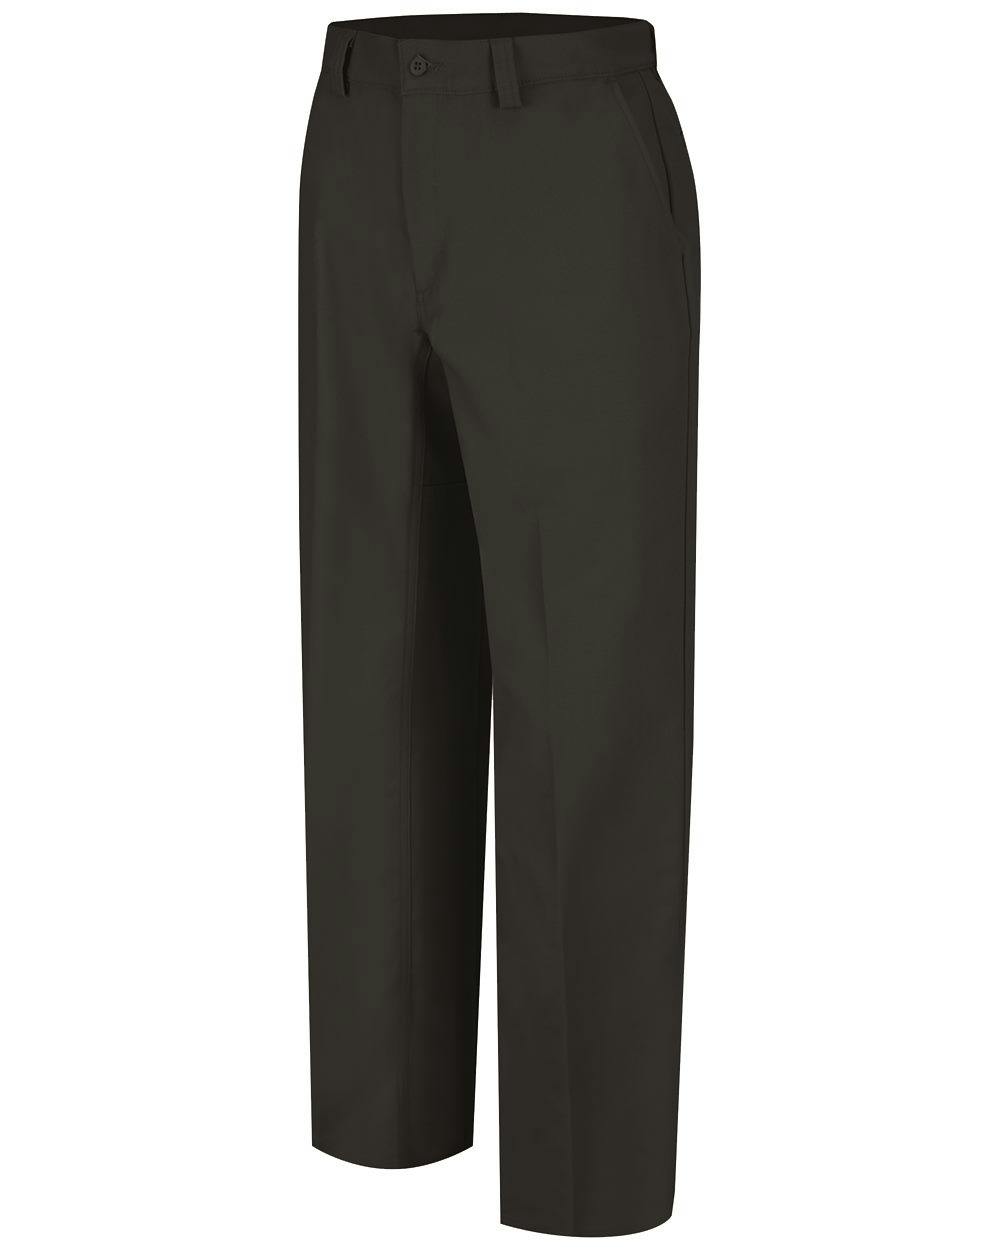 Image for Plain Front Work Pants - WP70